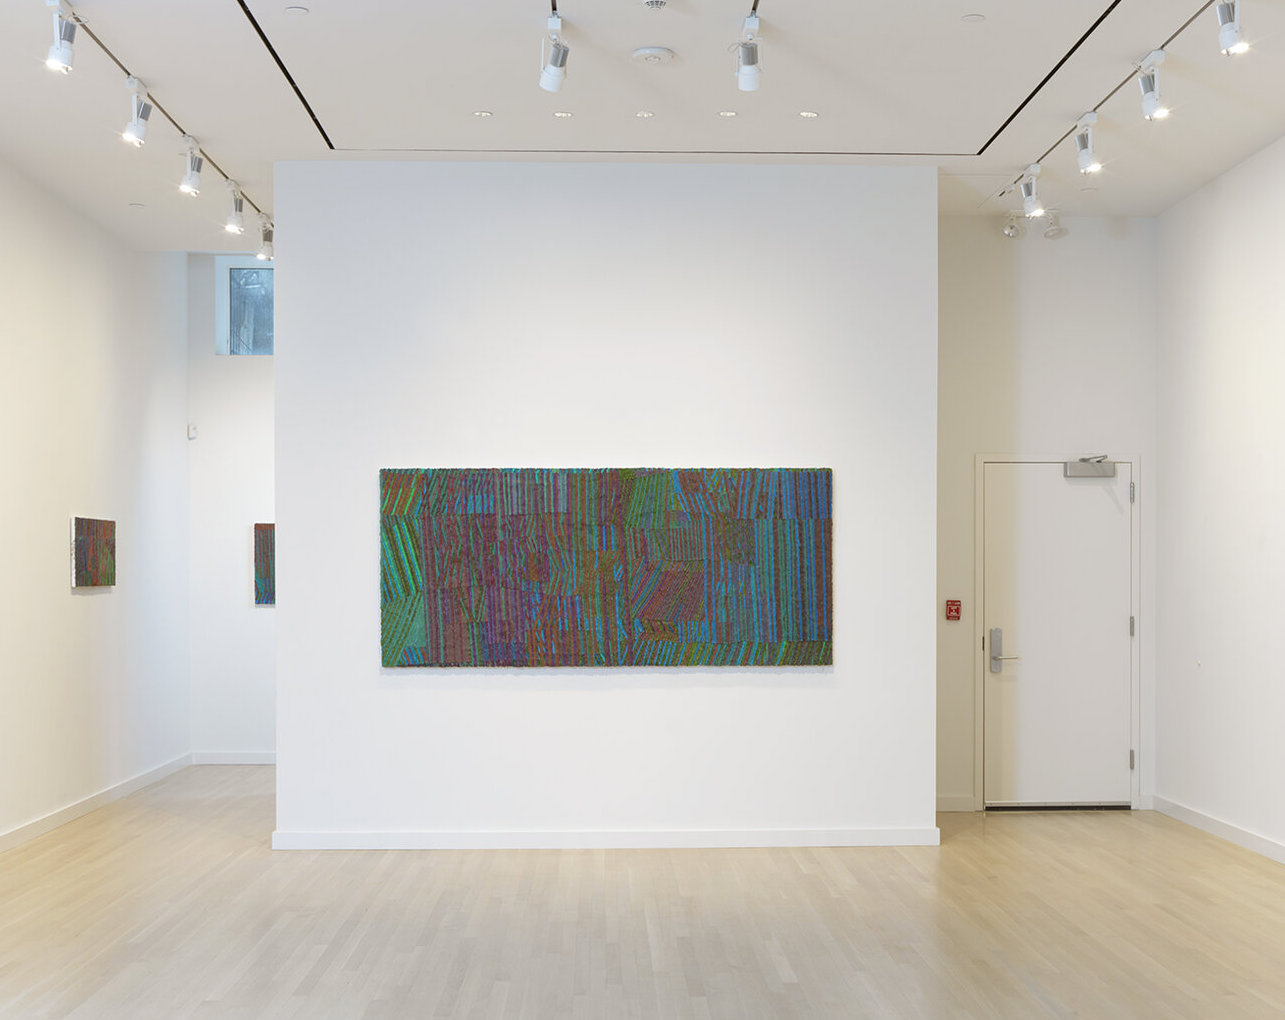 Installation view: paintings by Brett Baker at the Milton Resnick and Pat Passlof Foundation (photo by Brian Buckley, courtesy of Resnick Passlof Foundation, New York)